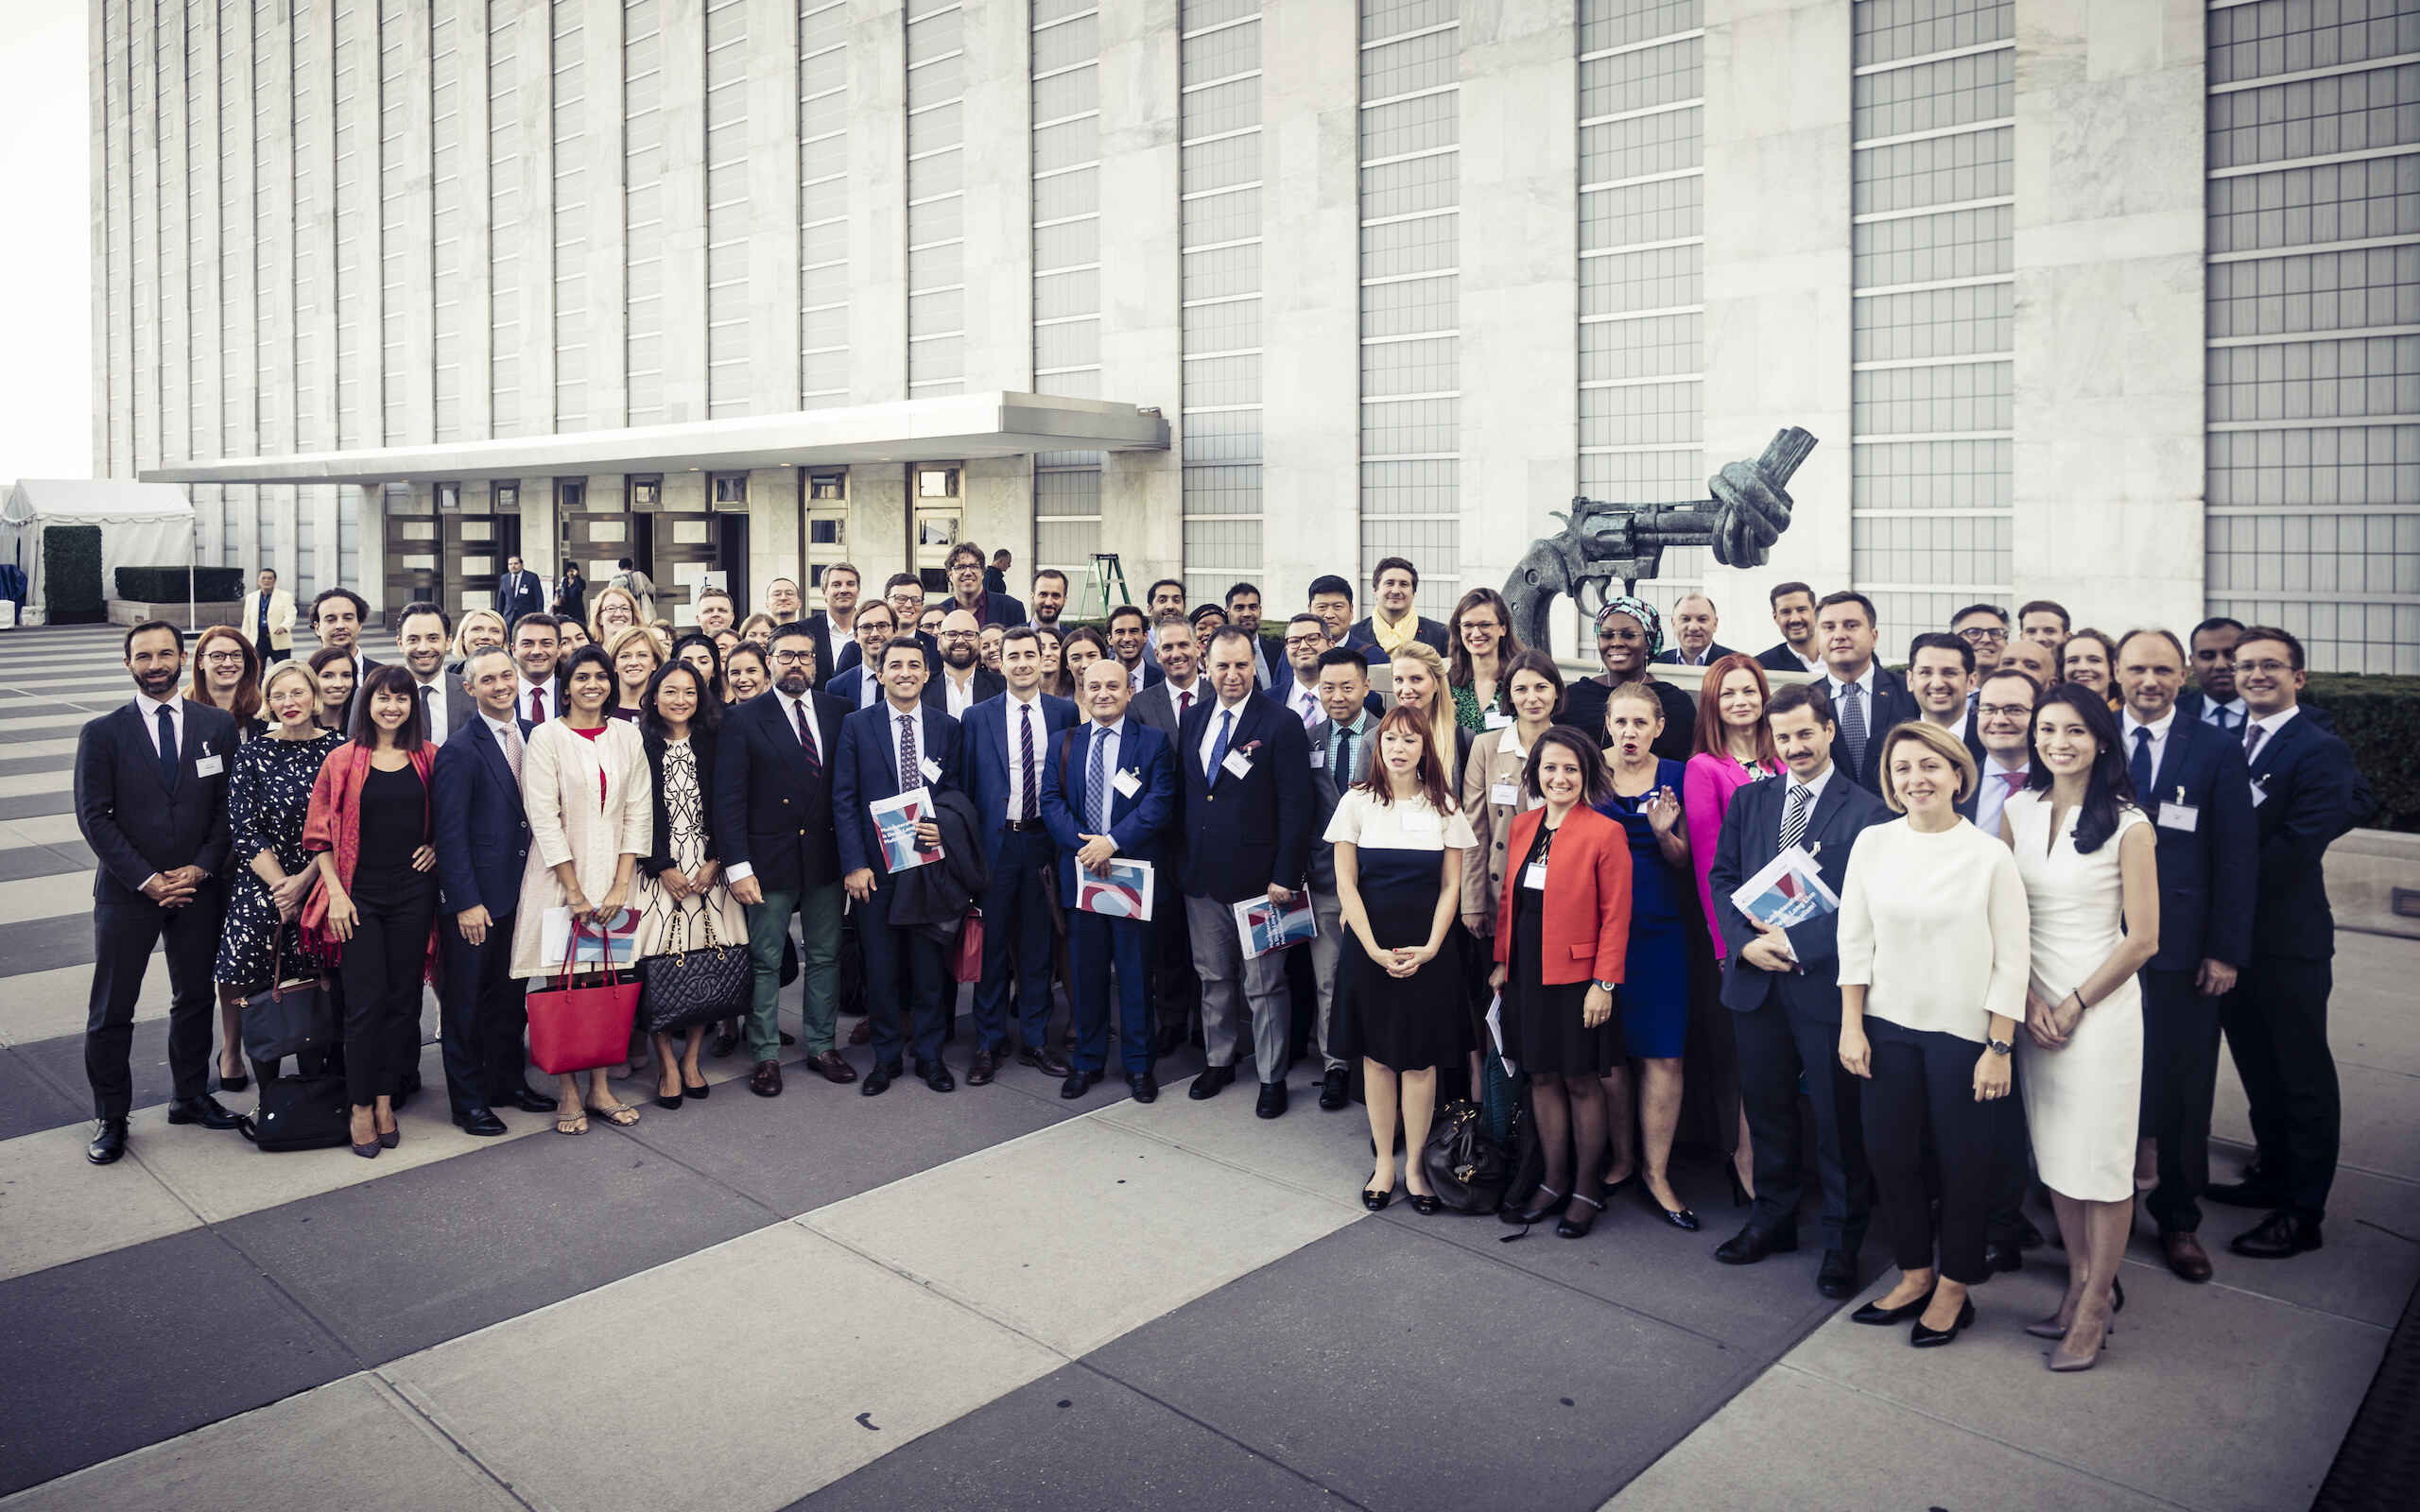 Munich Young Leaders in front of the UN headquarters in New York